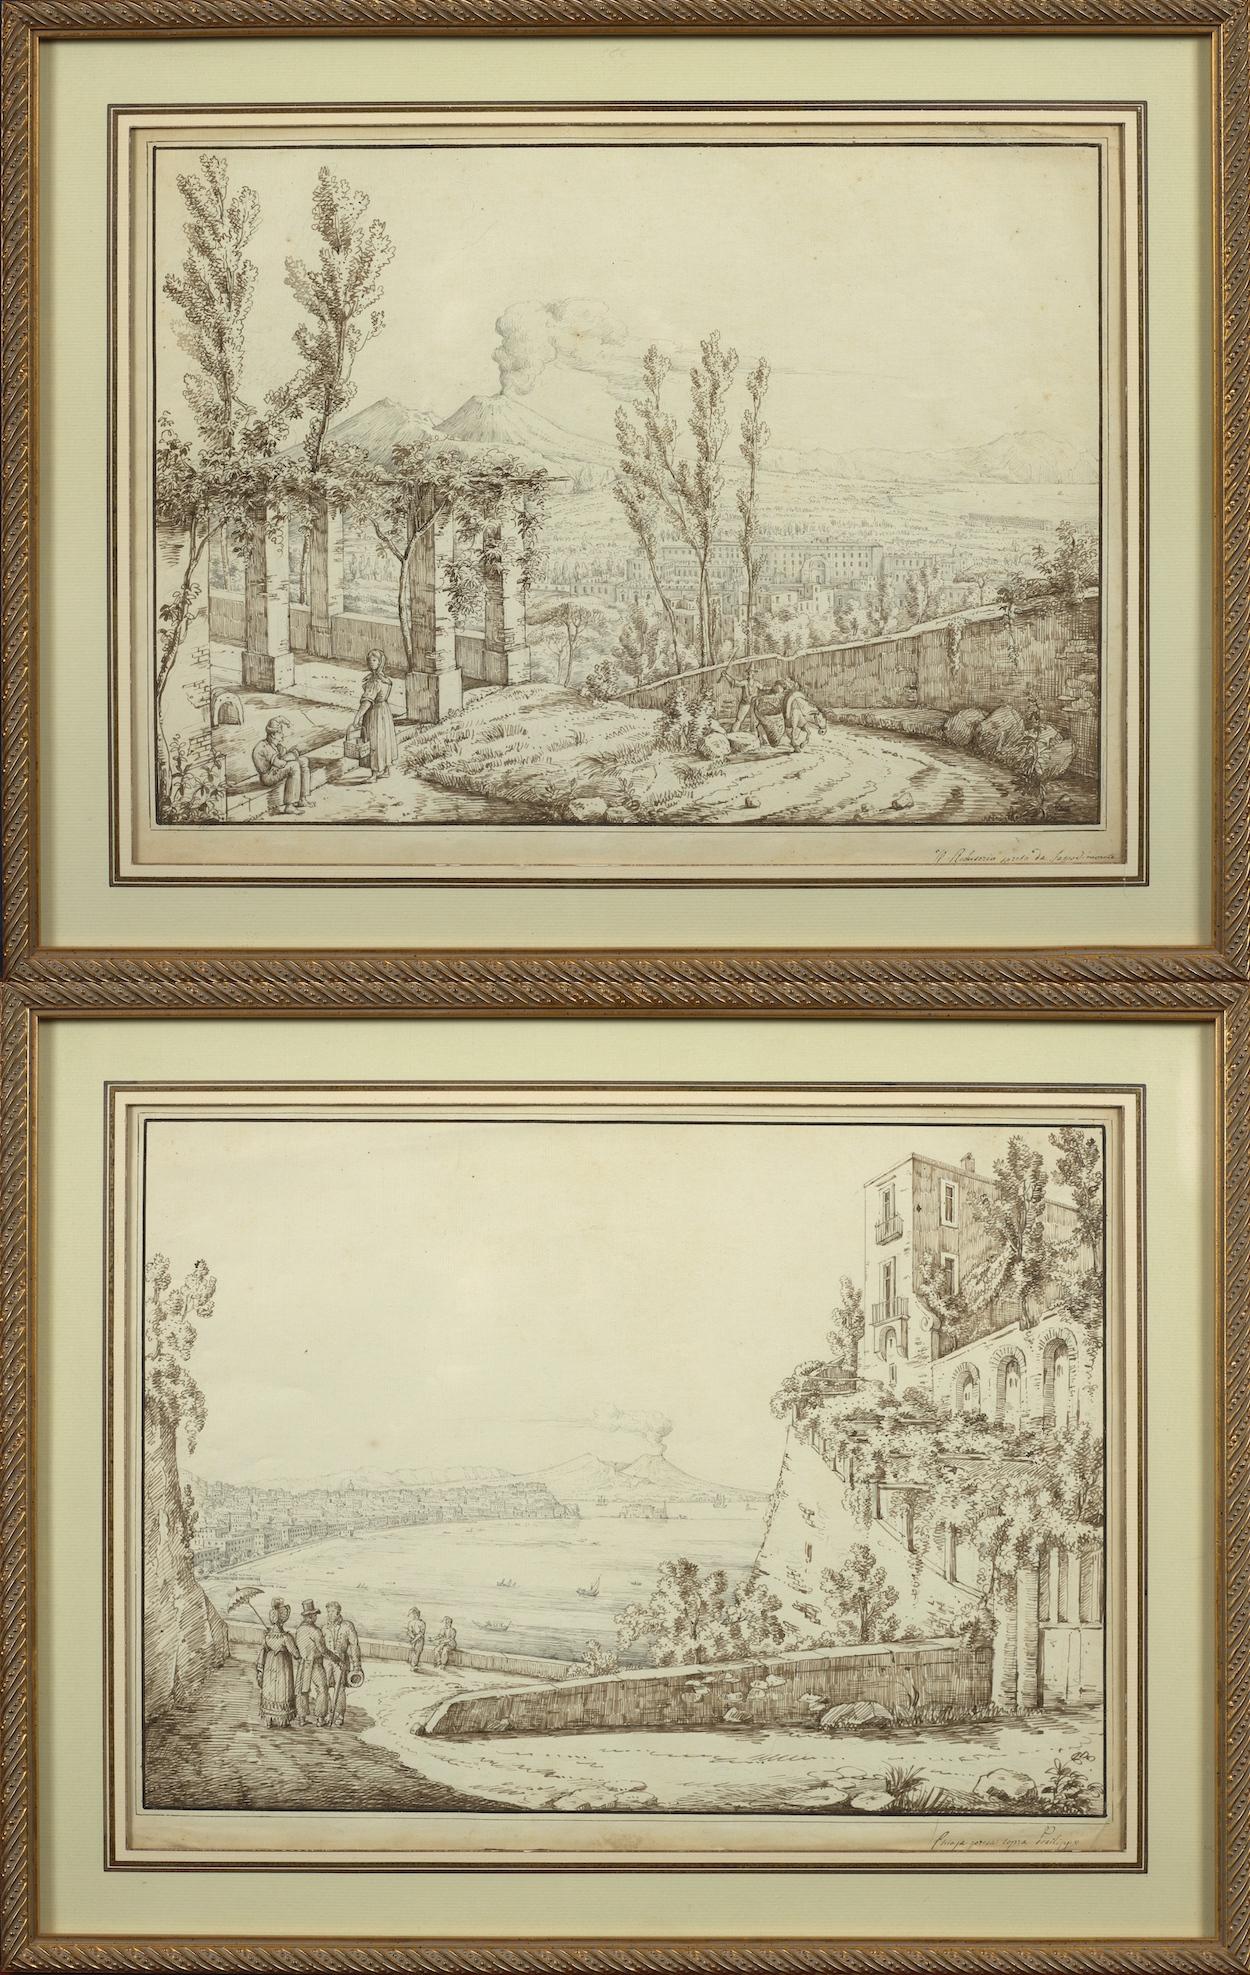 Antonio Senape Landscape Art - A View of Capodimonte and A View of Posillipo in Naples; Two Drawings 